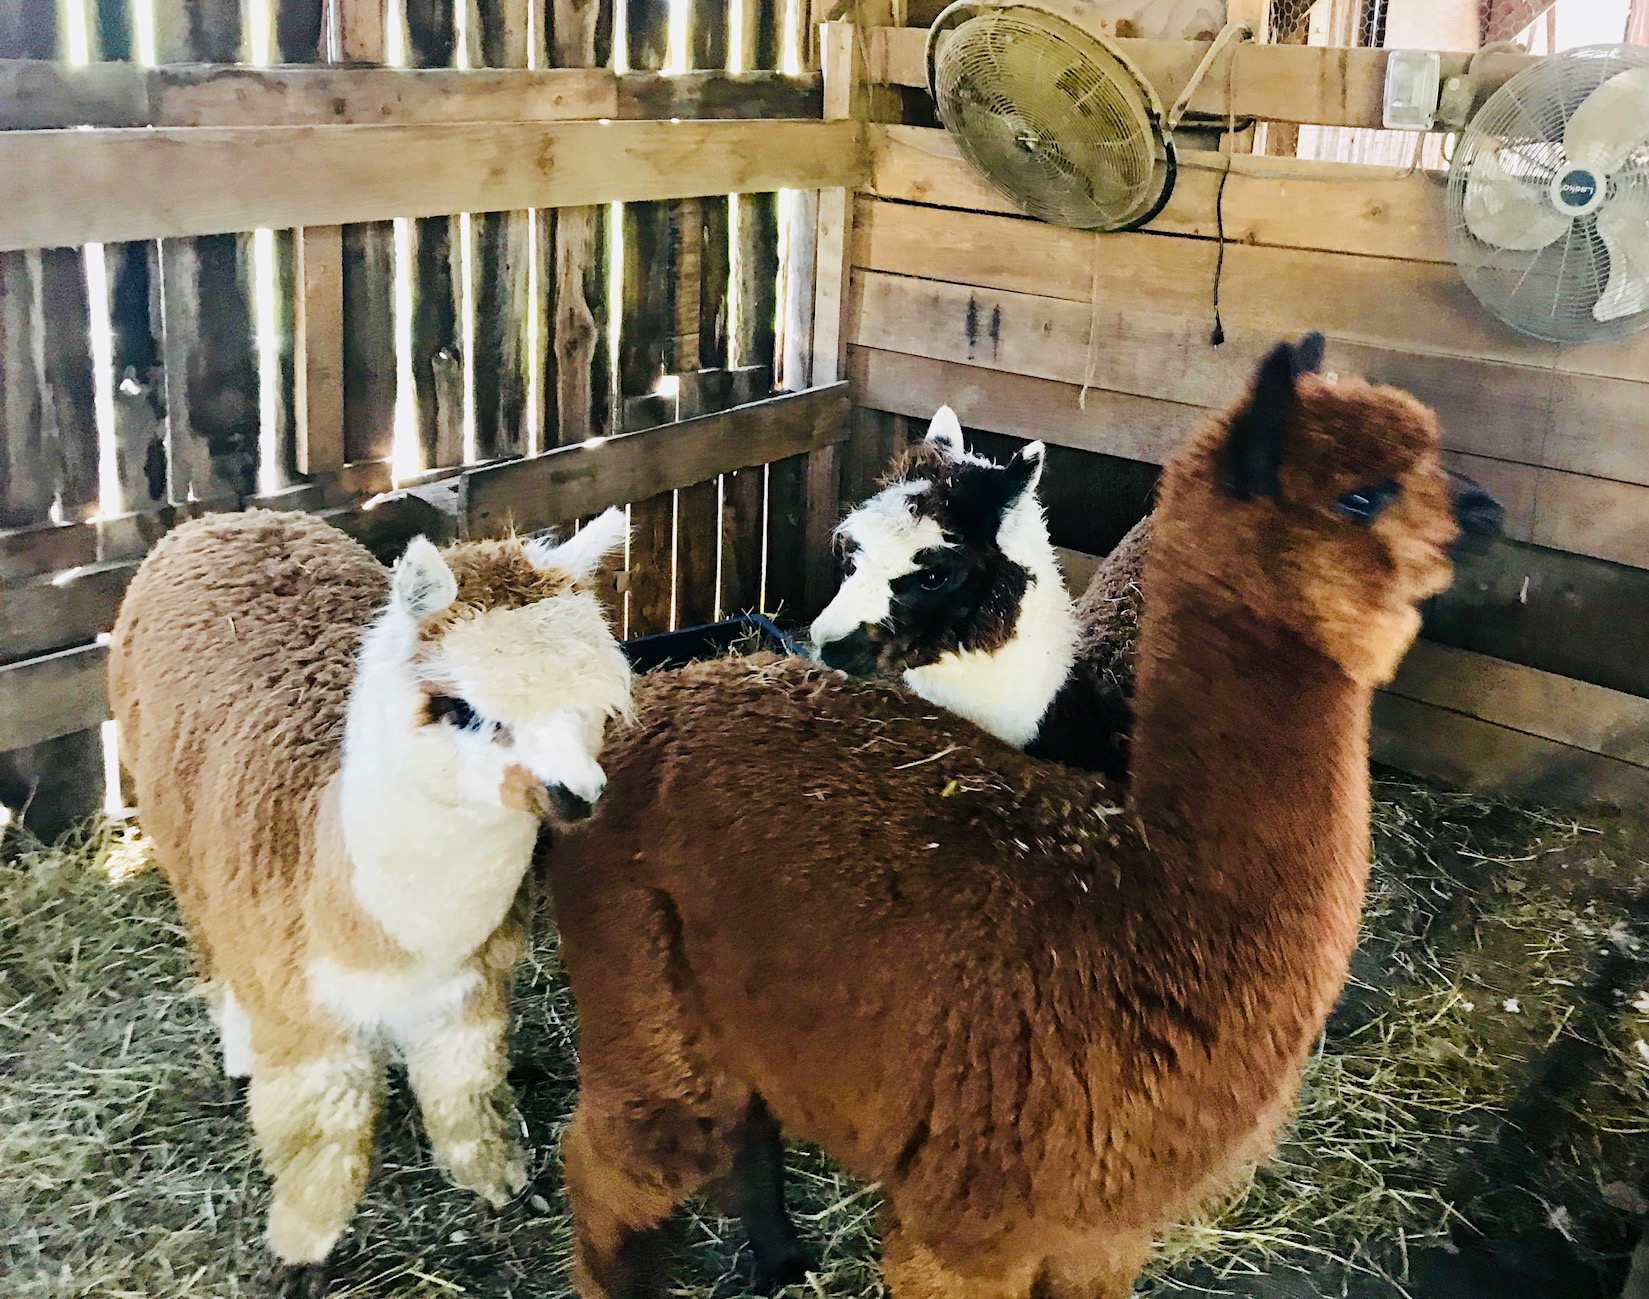 Alpaca Shearing Time – Watch How it’s Done